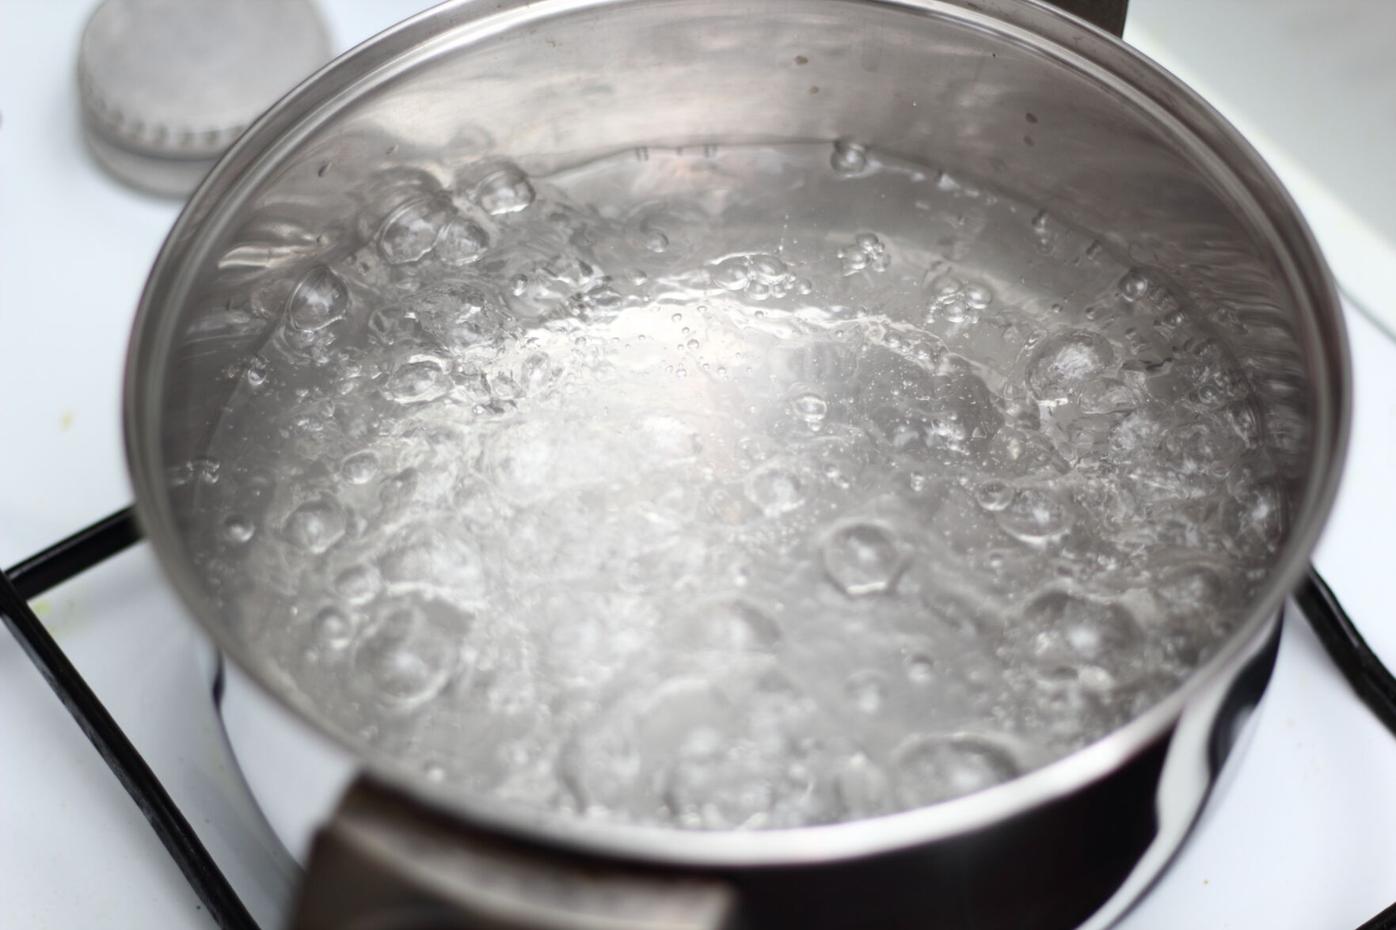 Water Boil Advisory Issued on Fort Huachuca, Local News Stories